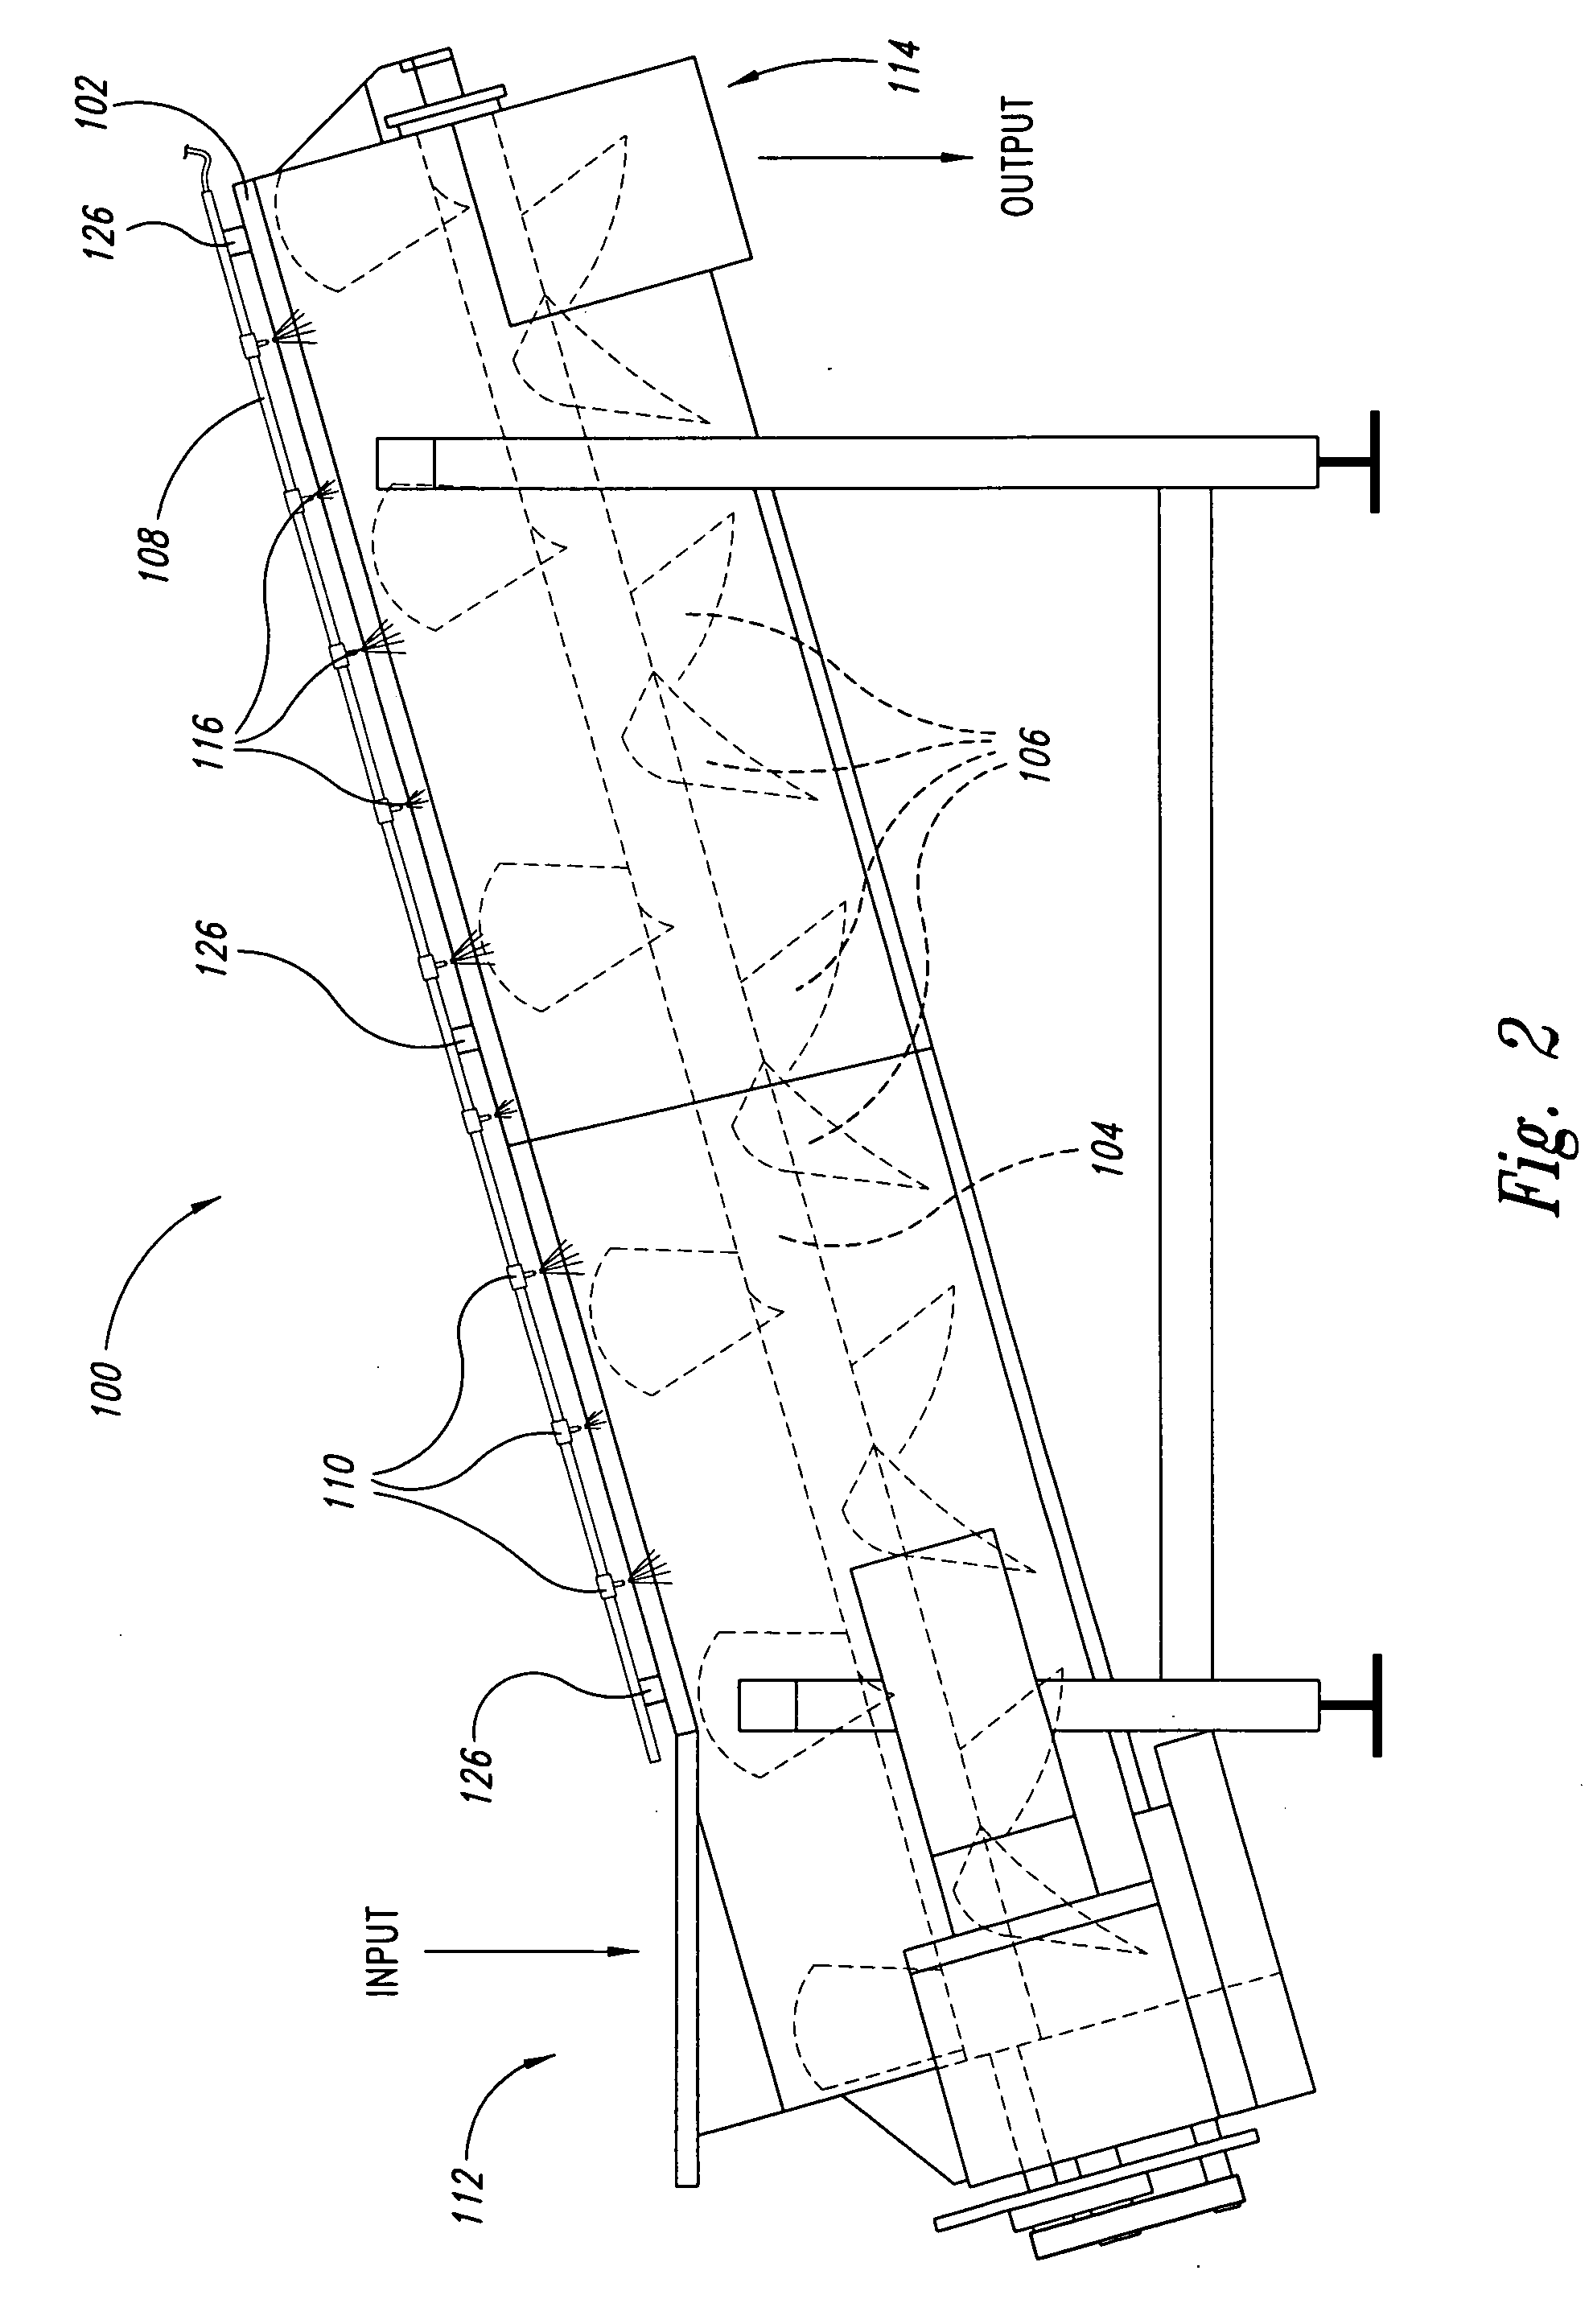 Treatment fluid application apparatus for foodstuffs and methods related thereto